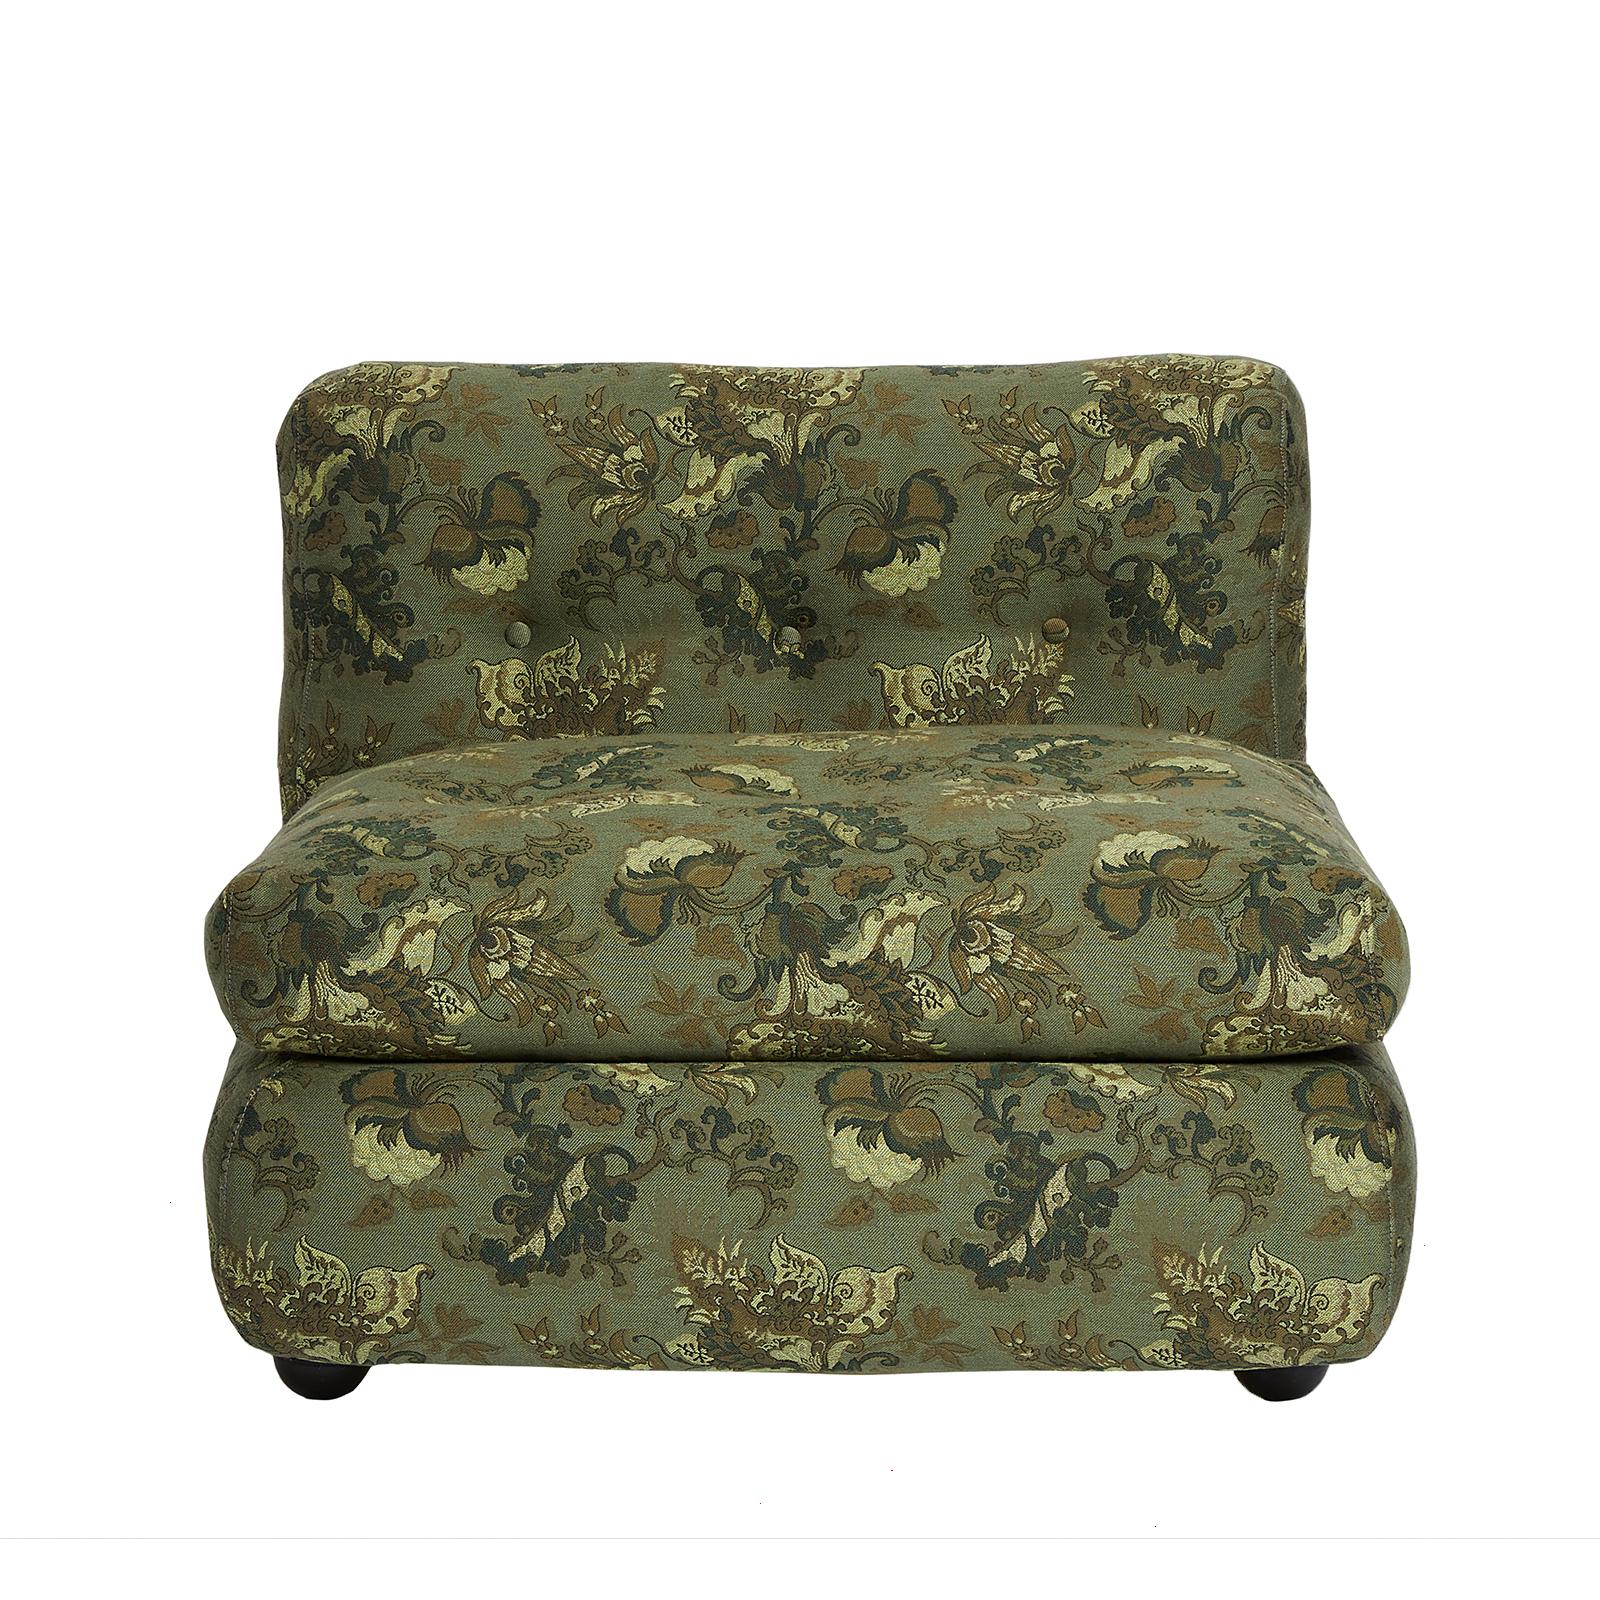 Amanta Set of 3 Armchairs by B&B/ C&B Italia, 1970s - PERSEPHONE Noir, Verdigris In Excellent Condition For Sale In New York, NY